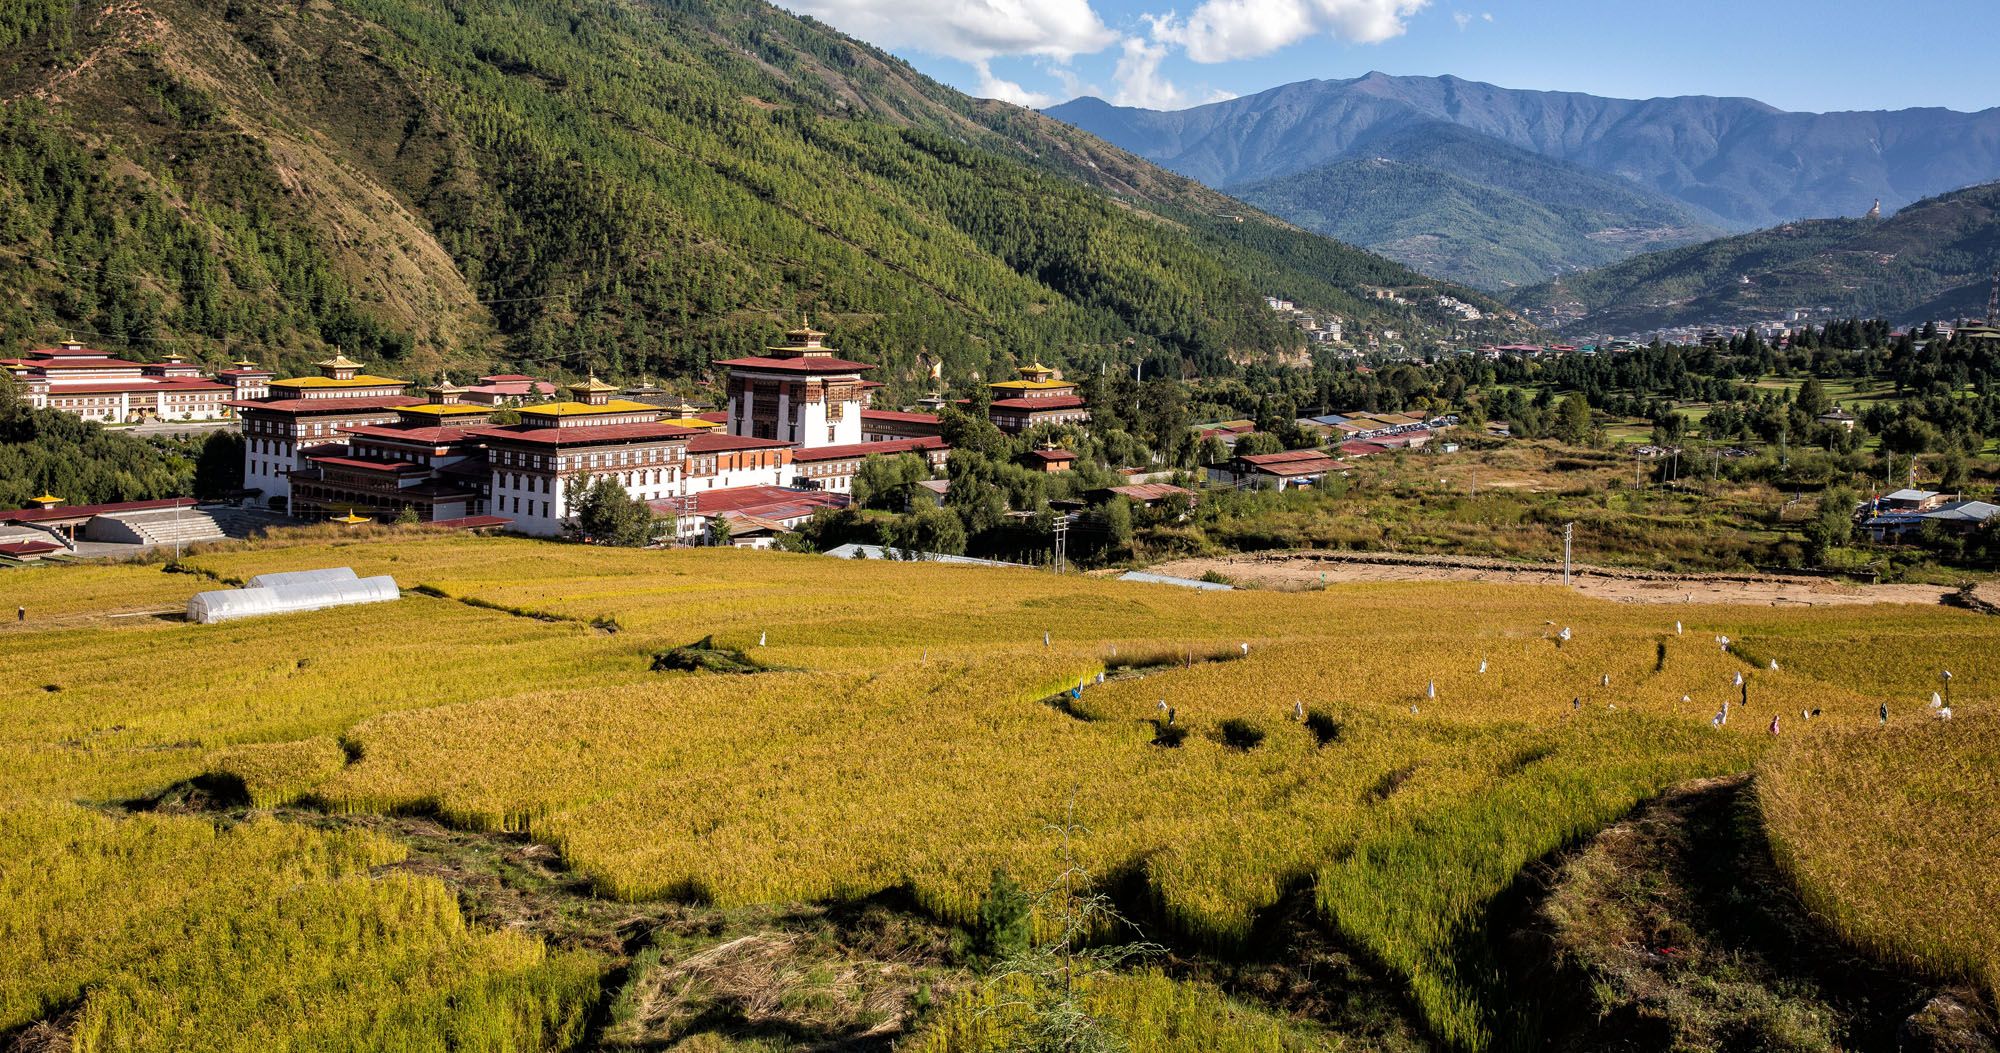 Featured image for “Bhutan, Land of the Thunder Dragon”